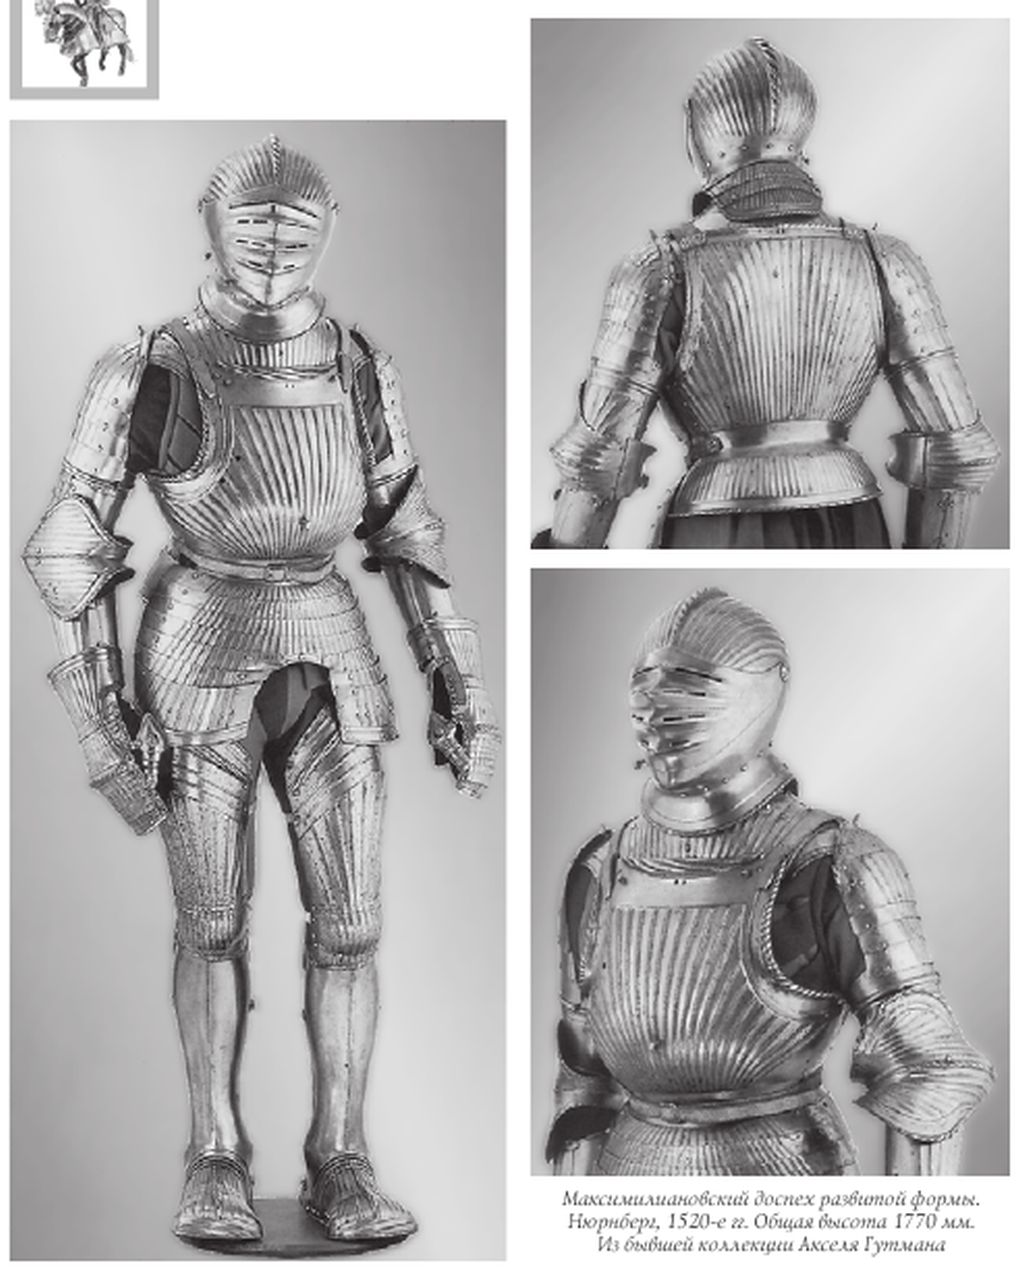 About armor combat - My, Fencing, Historical fencing, Armor, Longpost, Steel arms